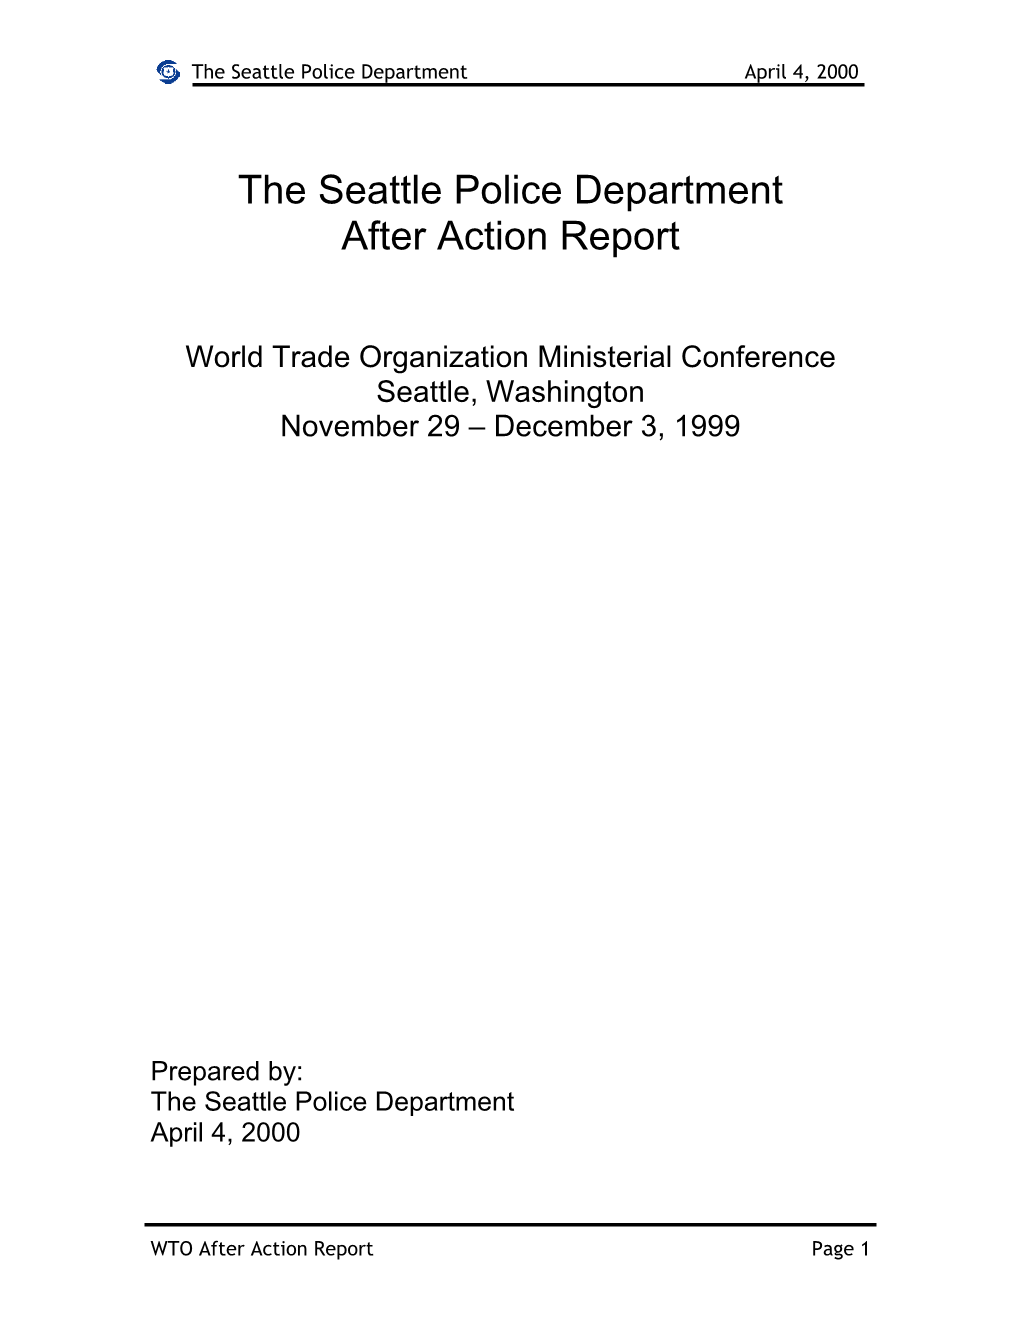 The Seattle Police Department After Action Report